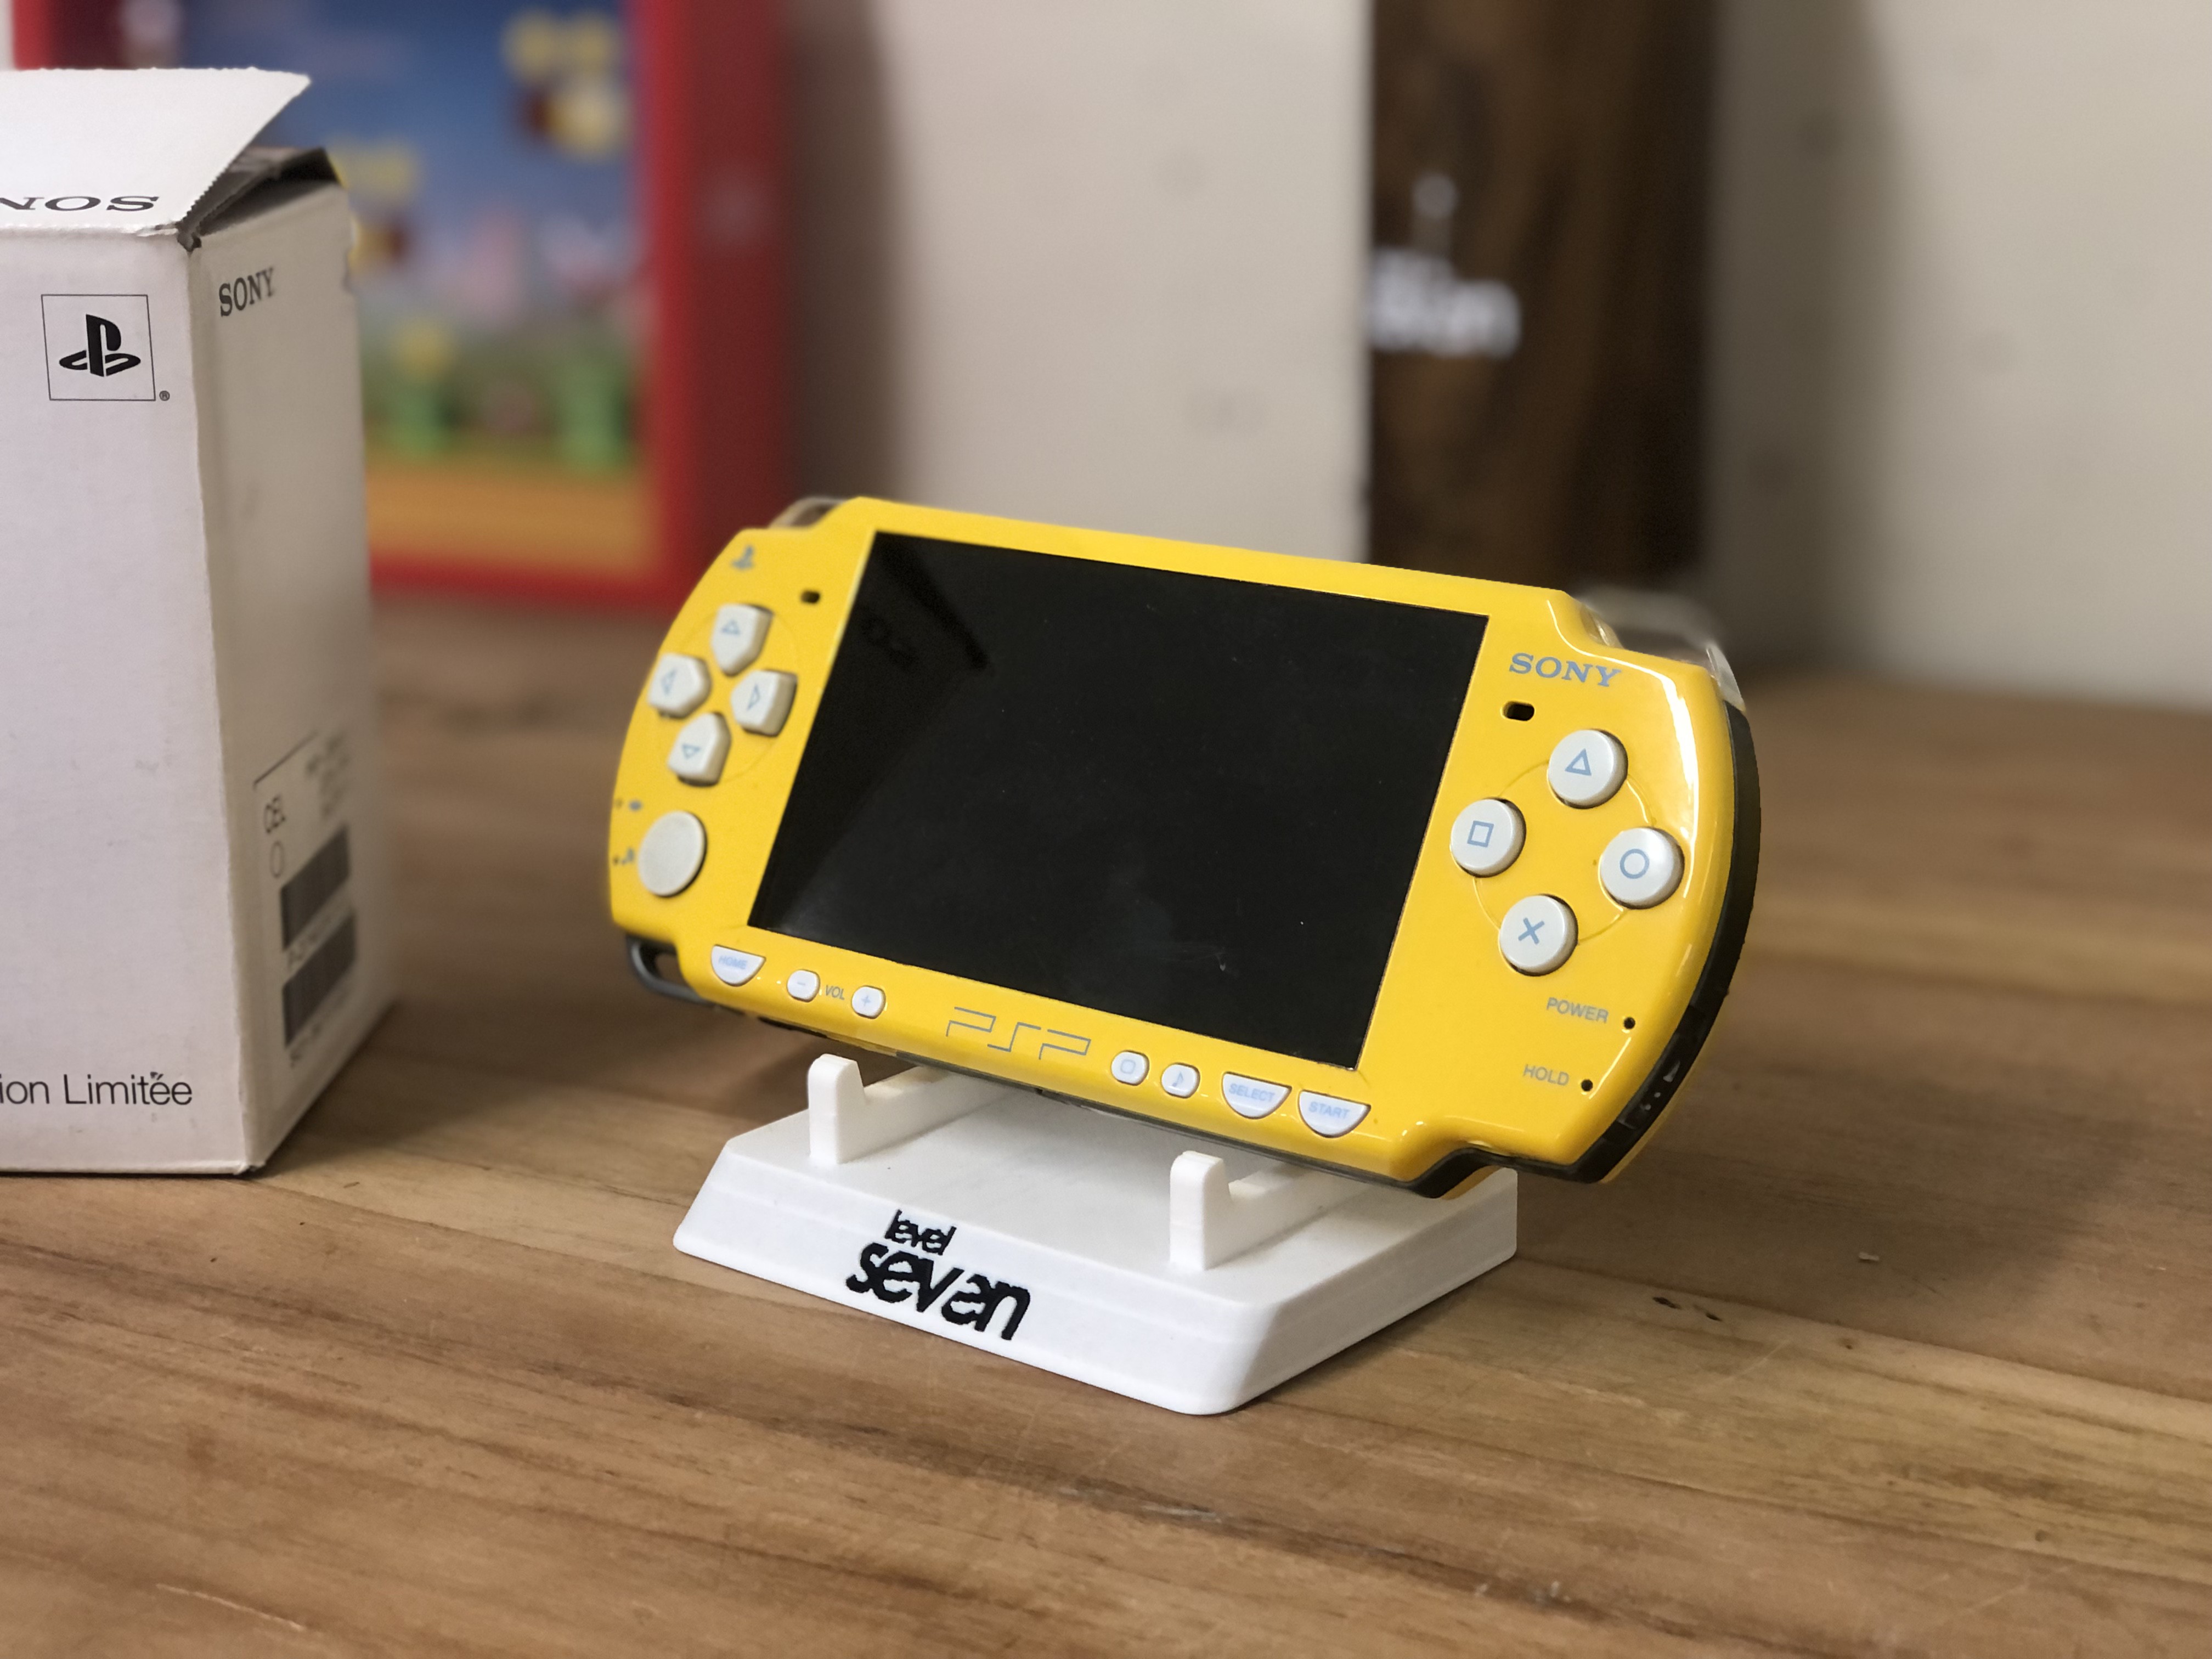 Playstation Portable PSP 2000 Simpsons Edition [Complete] - Playstation Portable Hardware - 3